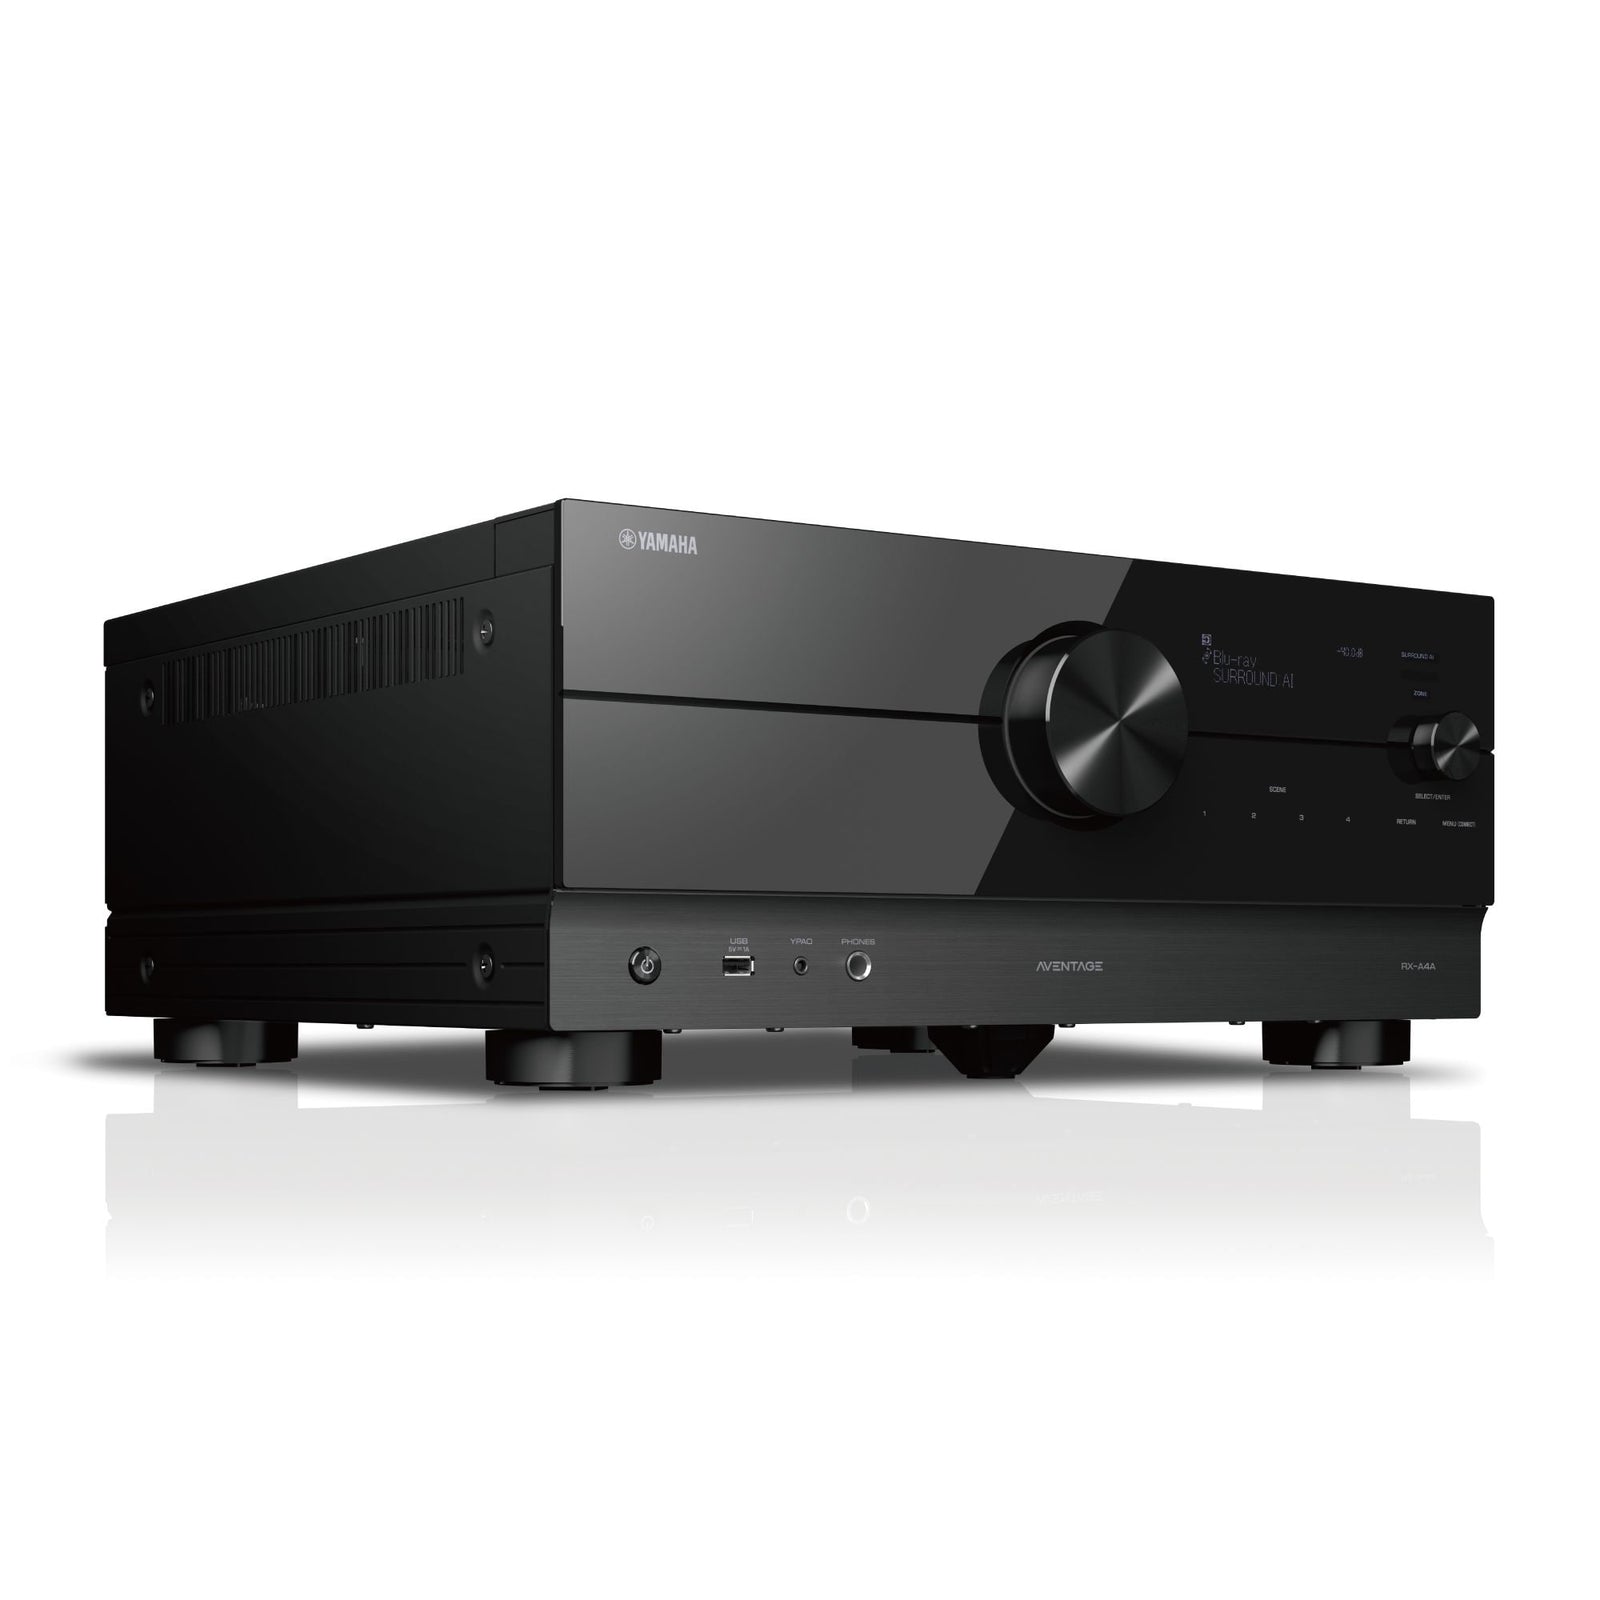 YAMAHA RX-A4A - AVENTAGE AV RECEIVERS | VINYL SOUND - 7.2 ch AVENTAGE with SURROUND:AI™, HDMI™ 7-in/3-out, the latest QCS407. 7.2 Channel powerful surround sound with Zone2 Wi-Fi, Bluetooth®, AirPlay 2, Spotify Connect and MusicCast multi-room audio SURROUND:AI automatically optimises the surround effect in real time Dolby Atmos® and DTS:X® with CINEMA DSP HD3 YPAO™-R.S.C.